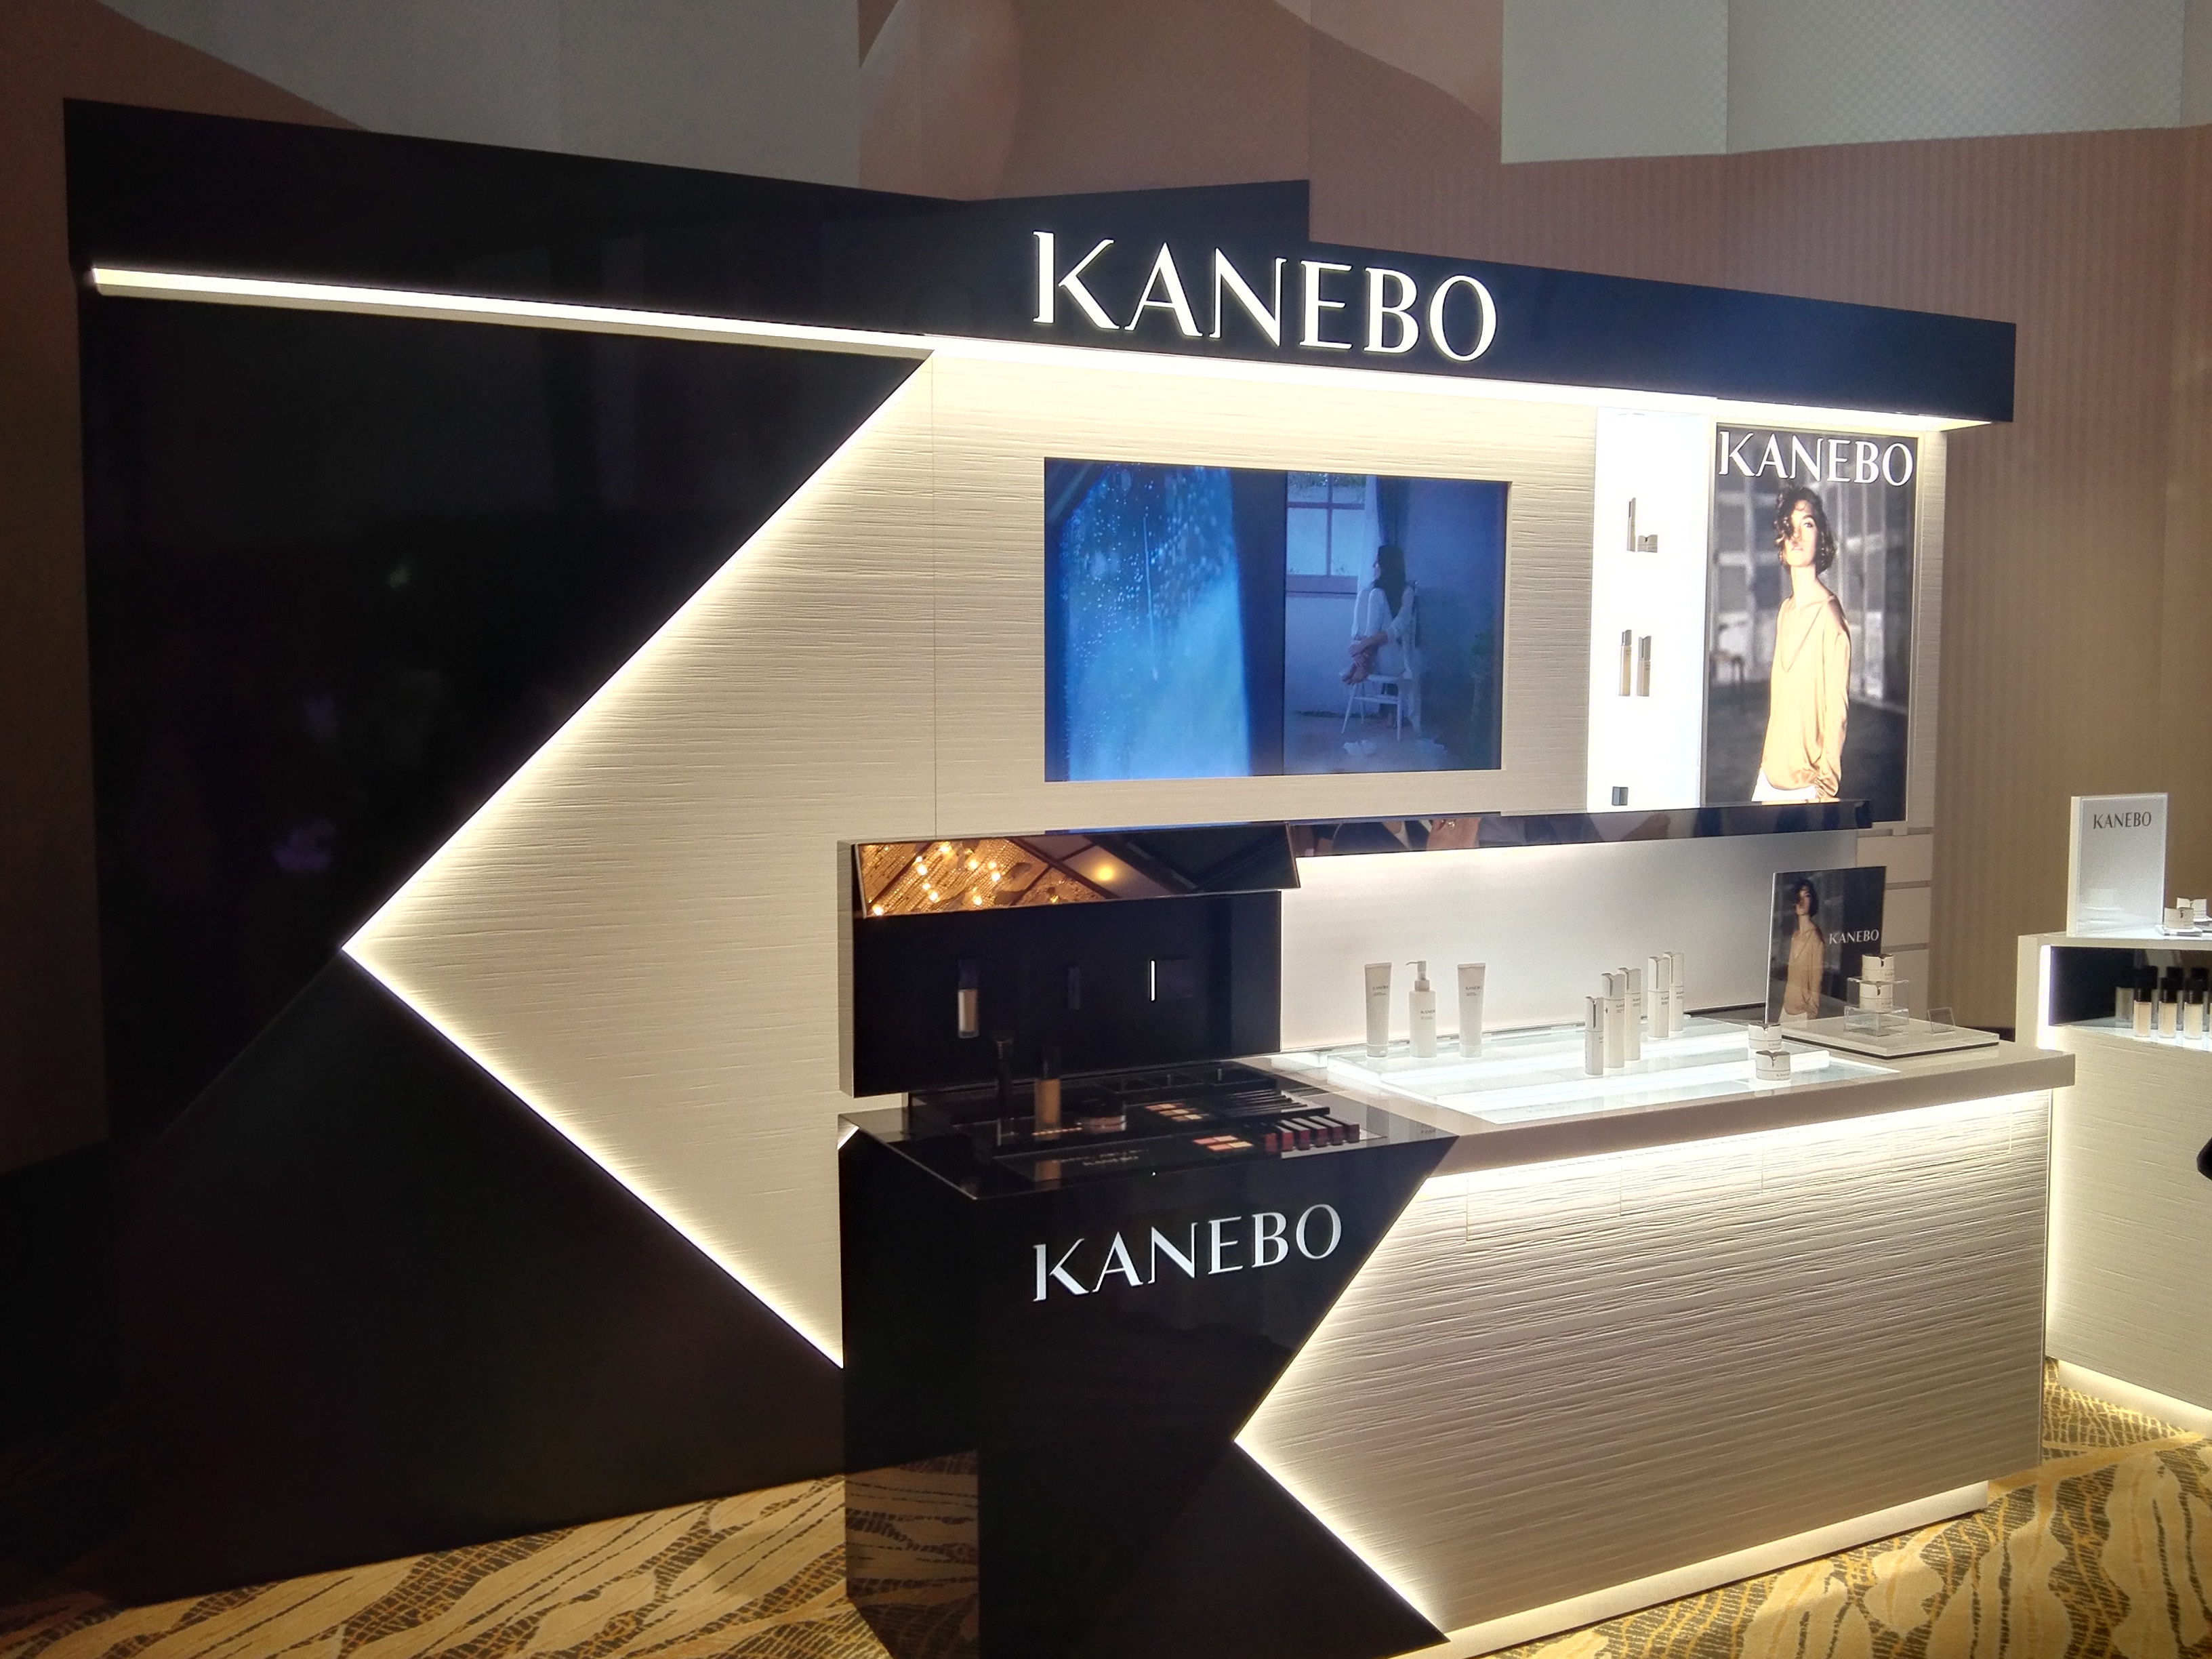 The new counter features a stylized letter "K" as part of the brand's marketing campaign